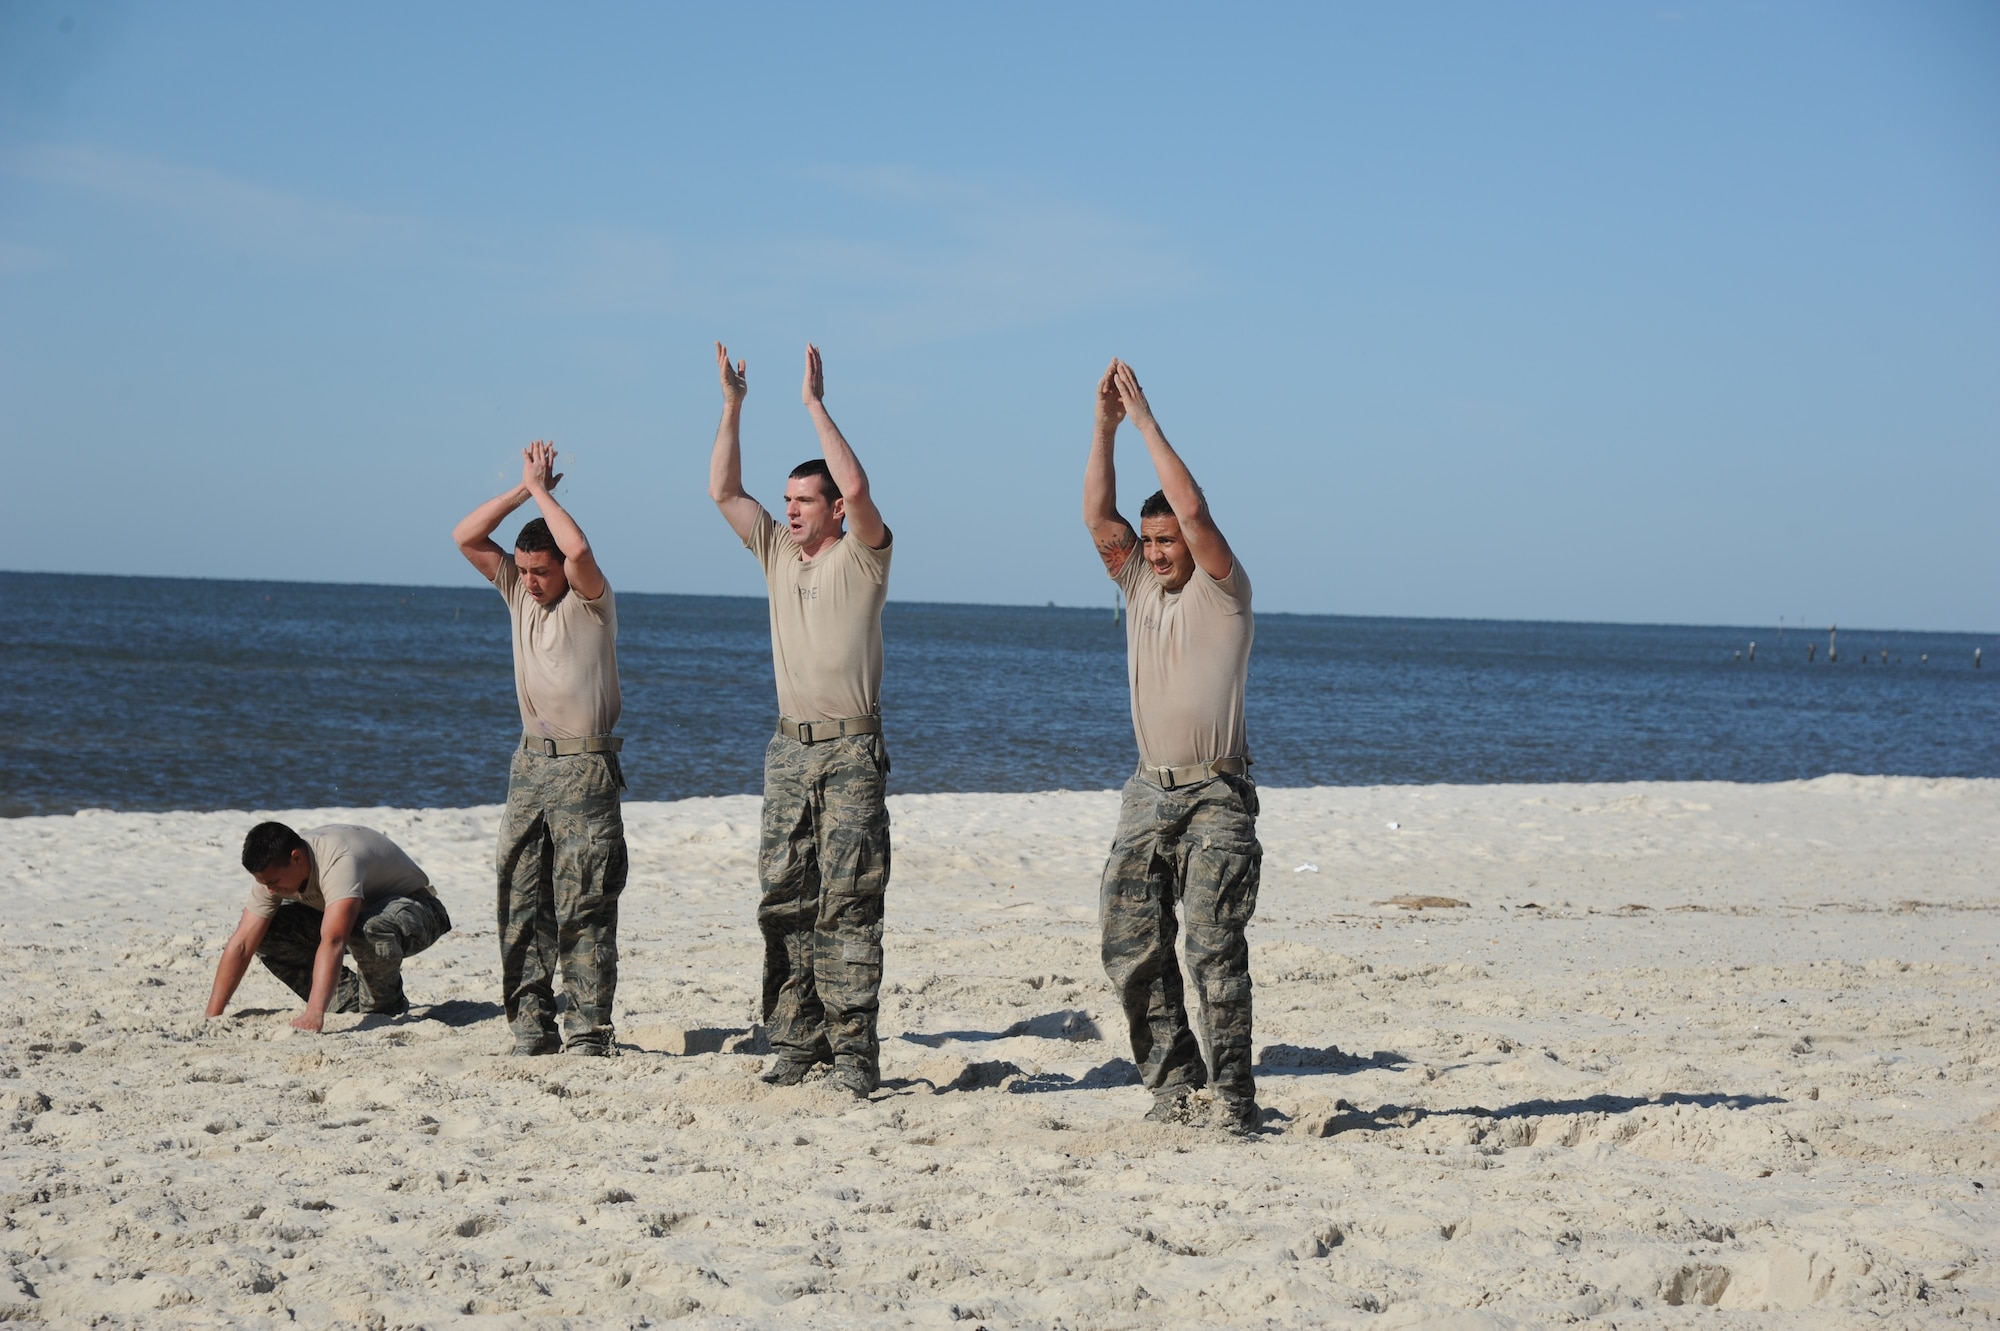 Combat control trainees from the 334th Training Squadron conduct a physical training session April 12, 2013, on Biloxi beach.  Combat controllers are ground troops who are embedded with special forces teams and provide close-air support for special forces units. While at Keesler, trainees learn how to run, swim, carry a rucksack and conduct air traffic control. These Airmen are prepared physically and mentally for the demands of the combat controller pipeline while earning air traffic control certification in just 15 weeks.  (U.S. Air Force photo by Kemberly Groue)